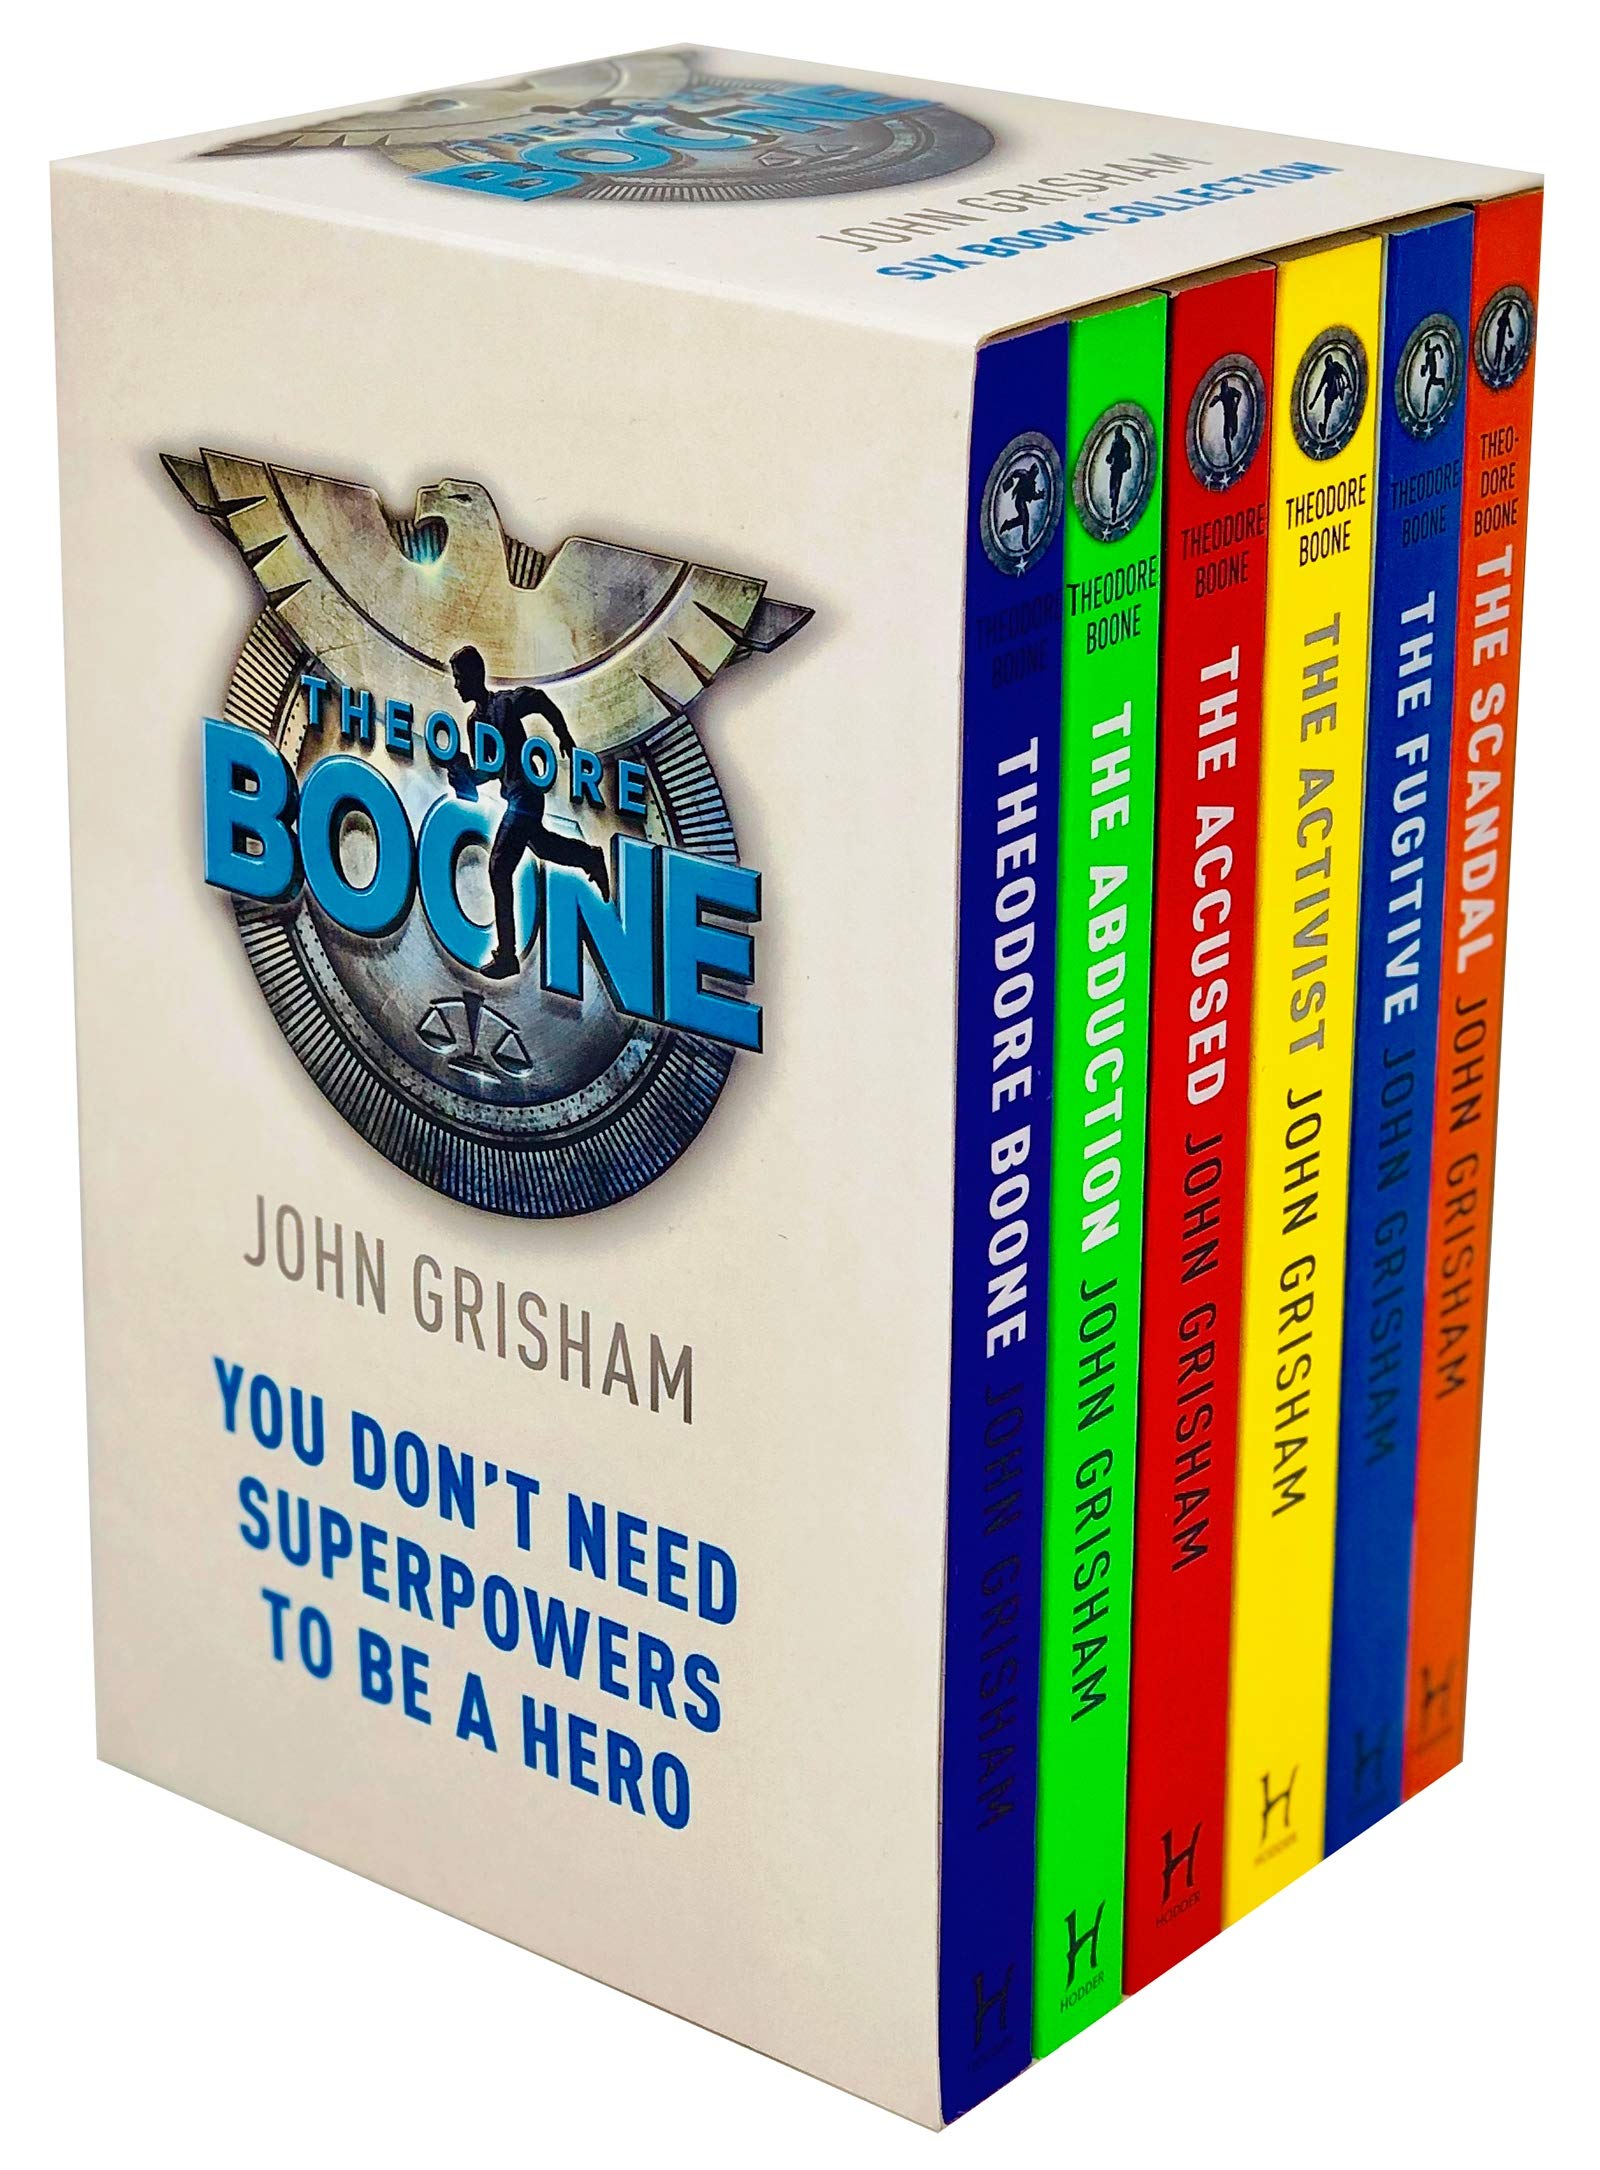 Theodore Boone Series 6 Books Collection Box Set by John Grisham Paperback NEW - Lets Buy Books